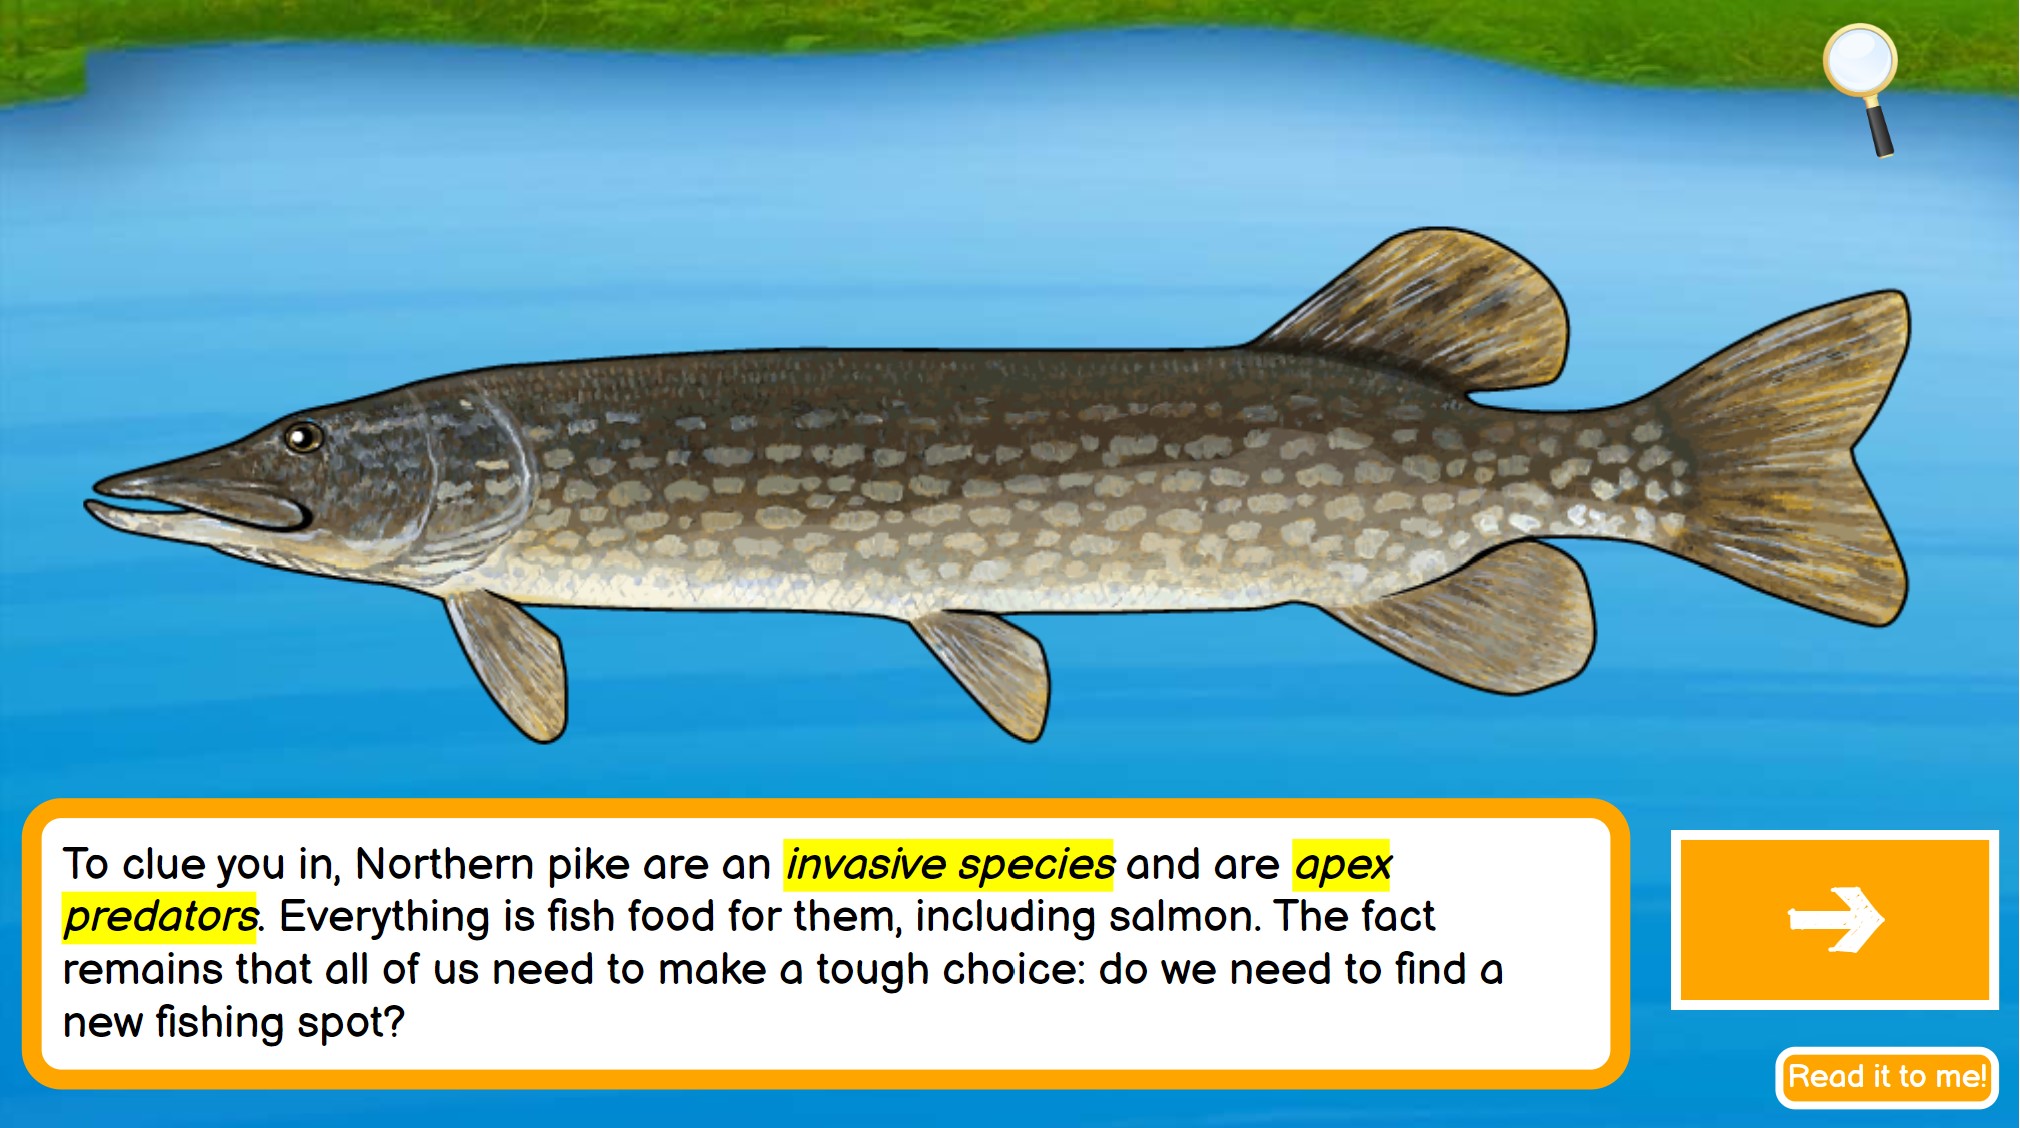 Picture of pike, which is an invasive species and apex predator